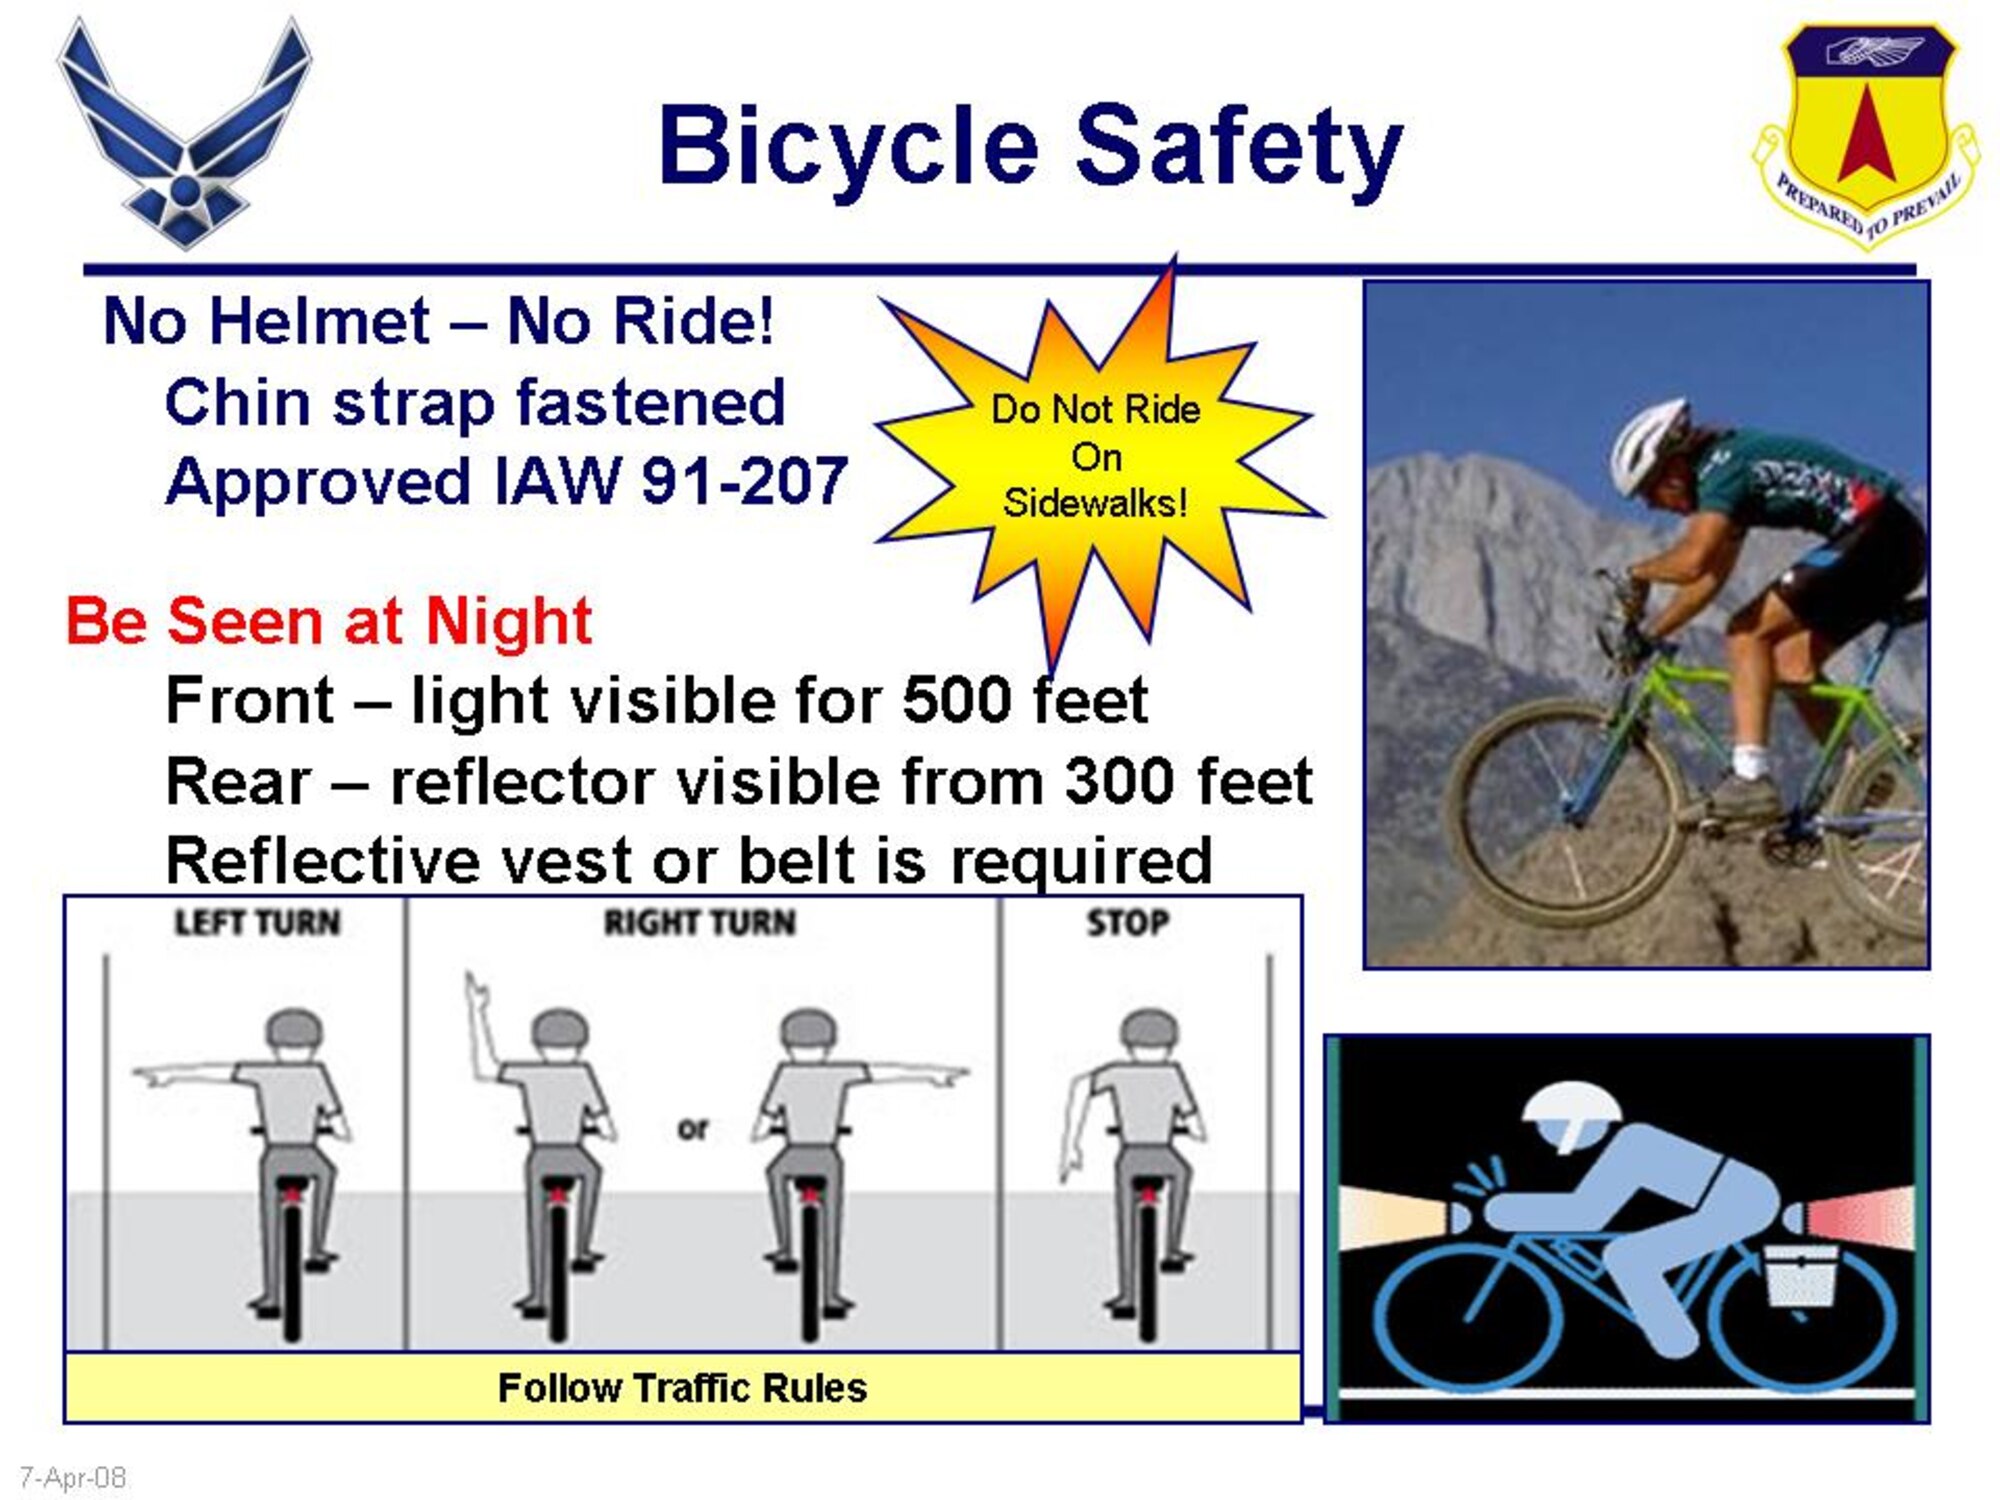 Bicycle Safety